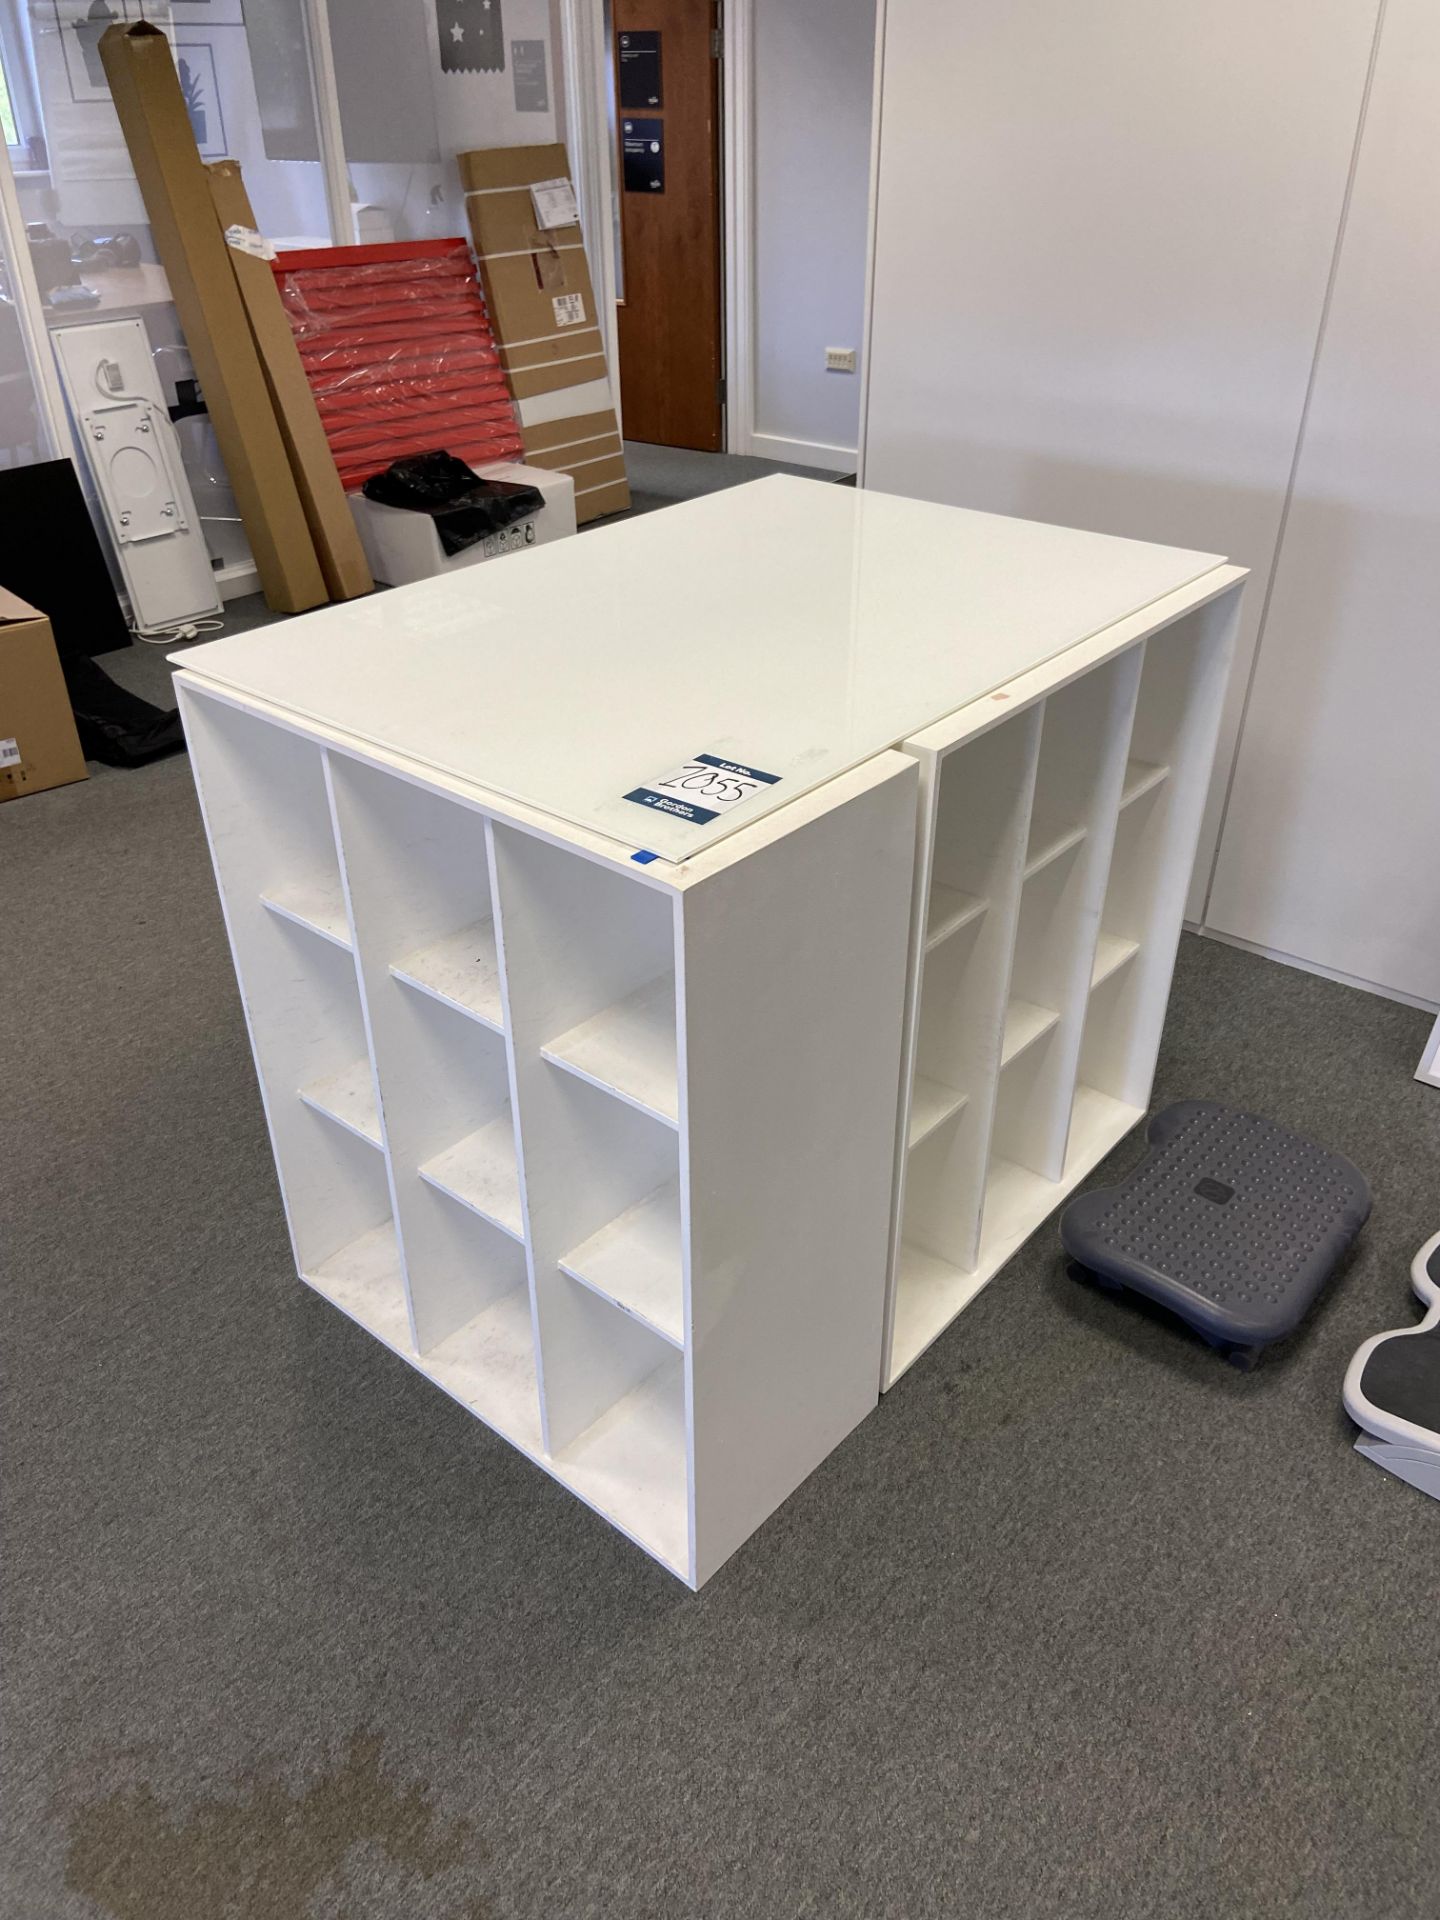 Lot comprisng: three white pigeon hole shelving units